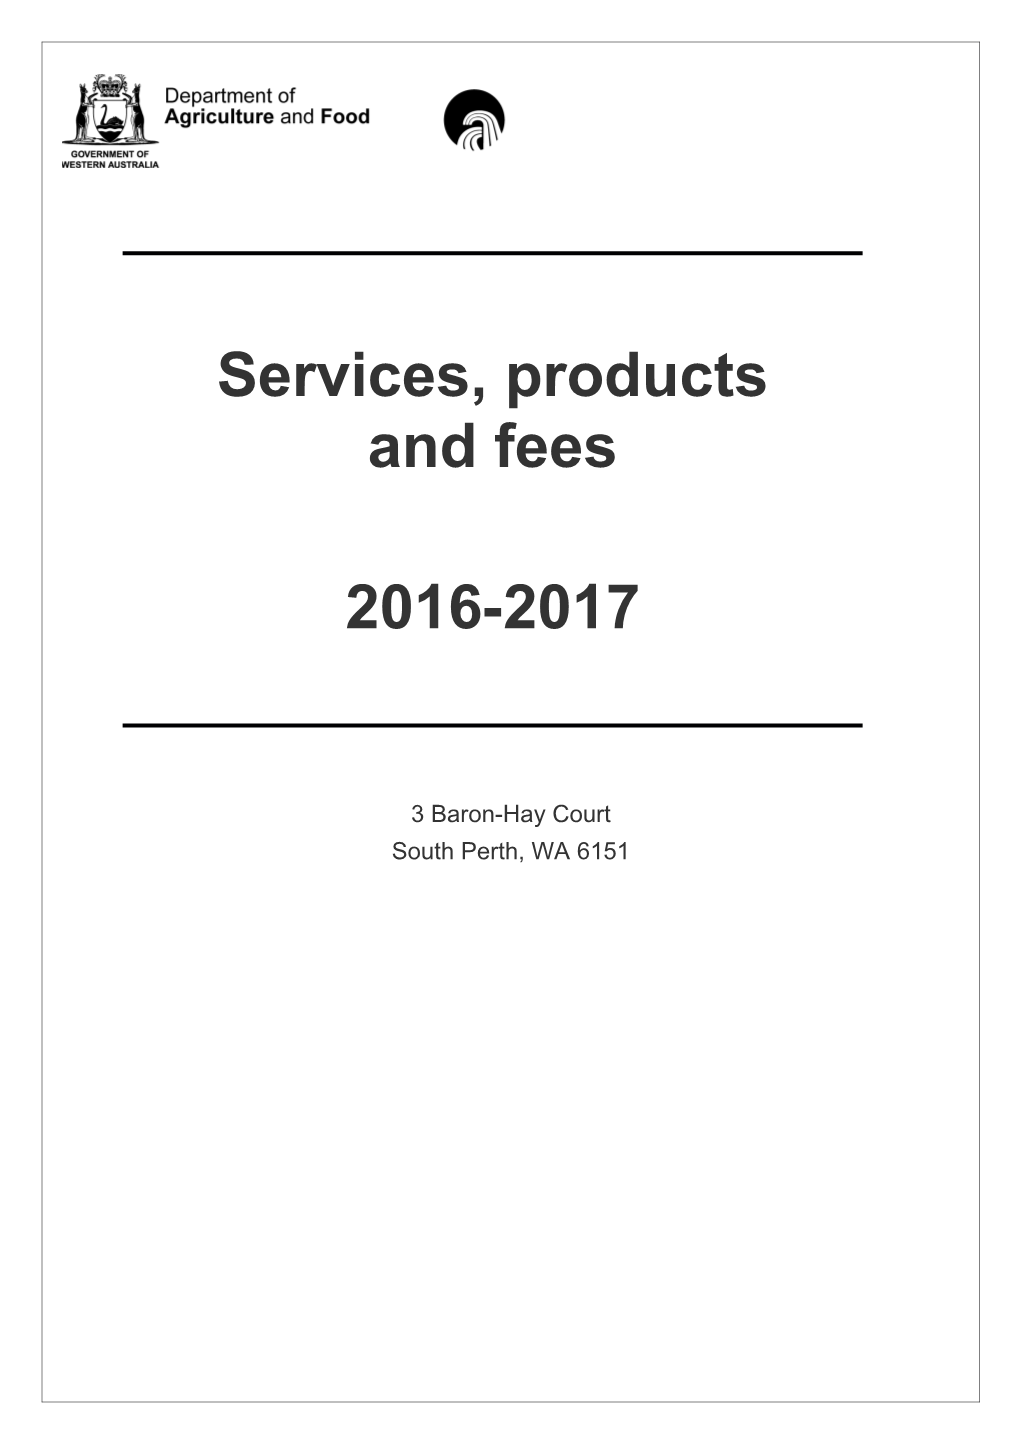 Service Products and Fees 2016-2017